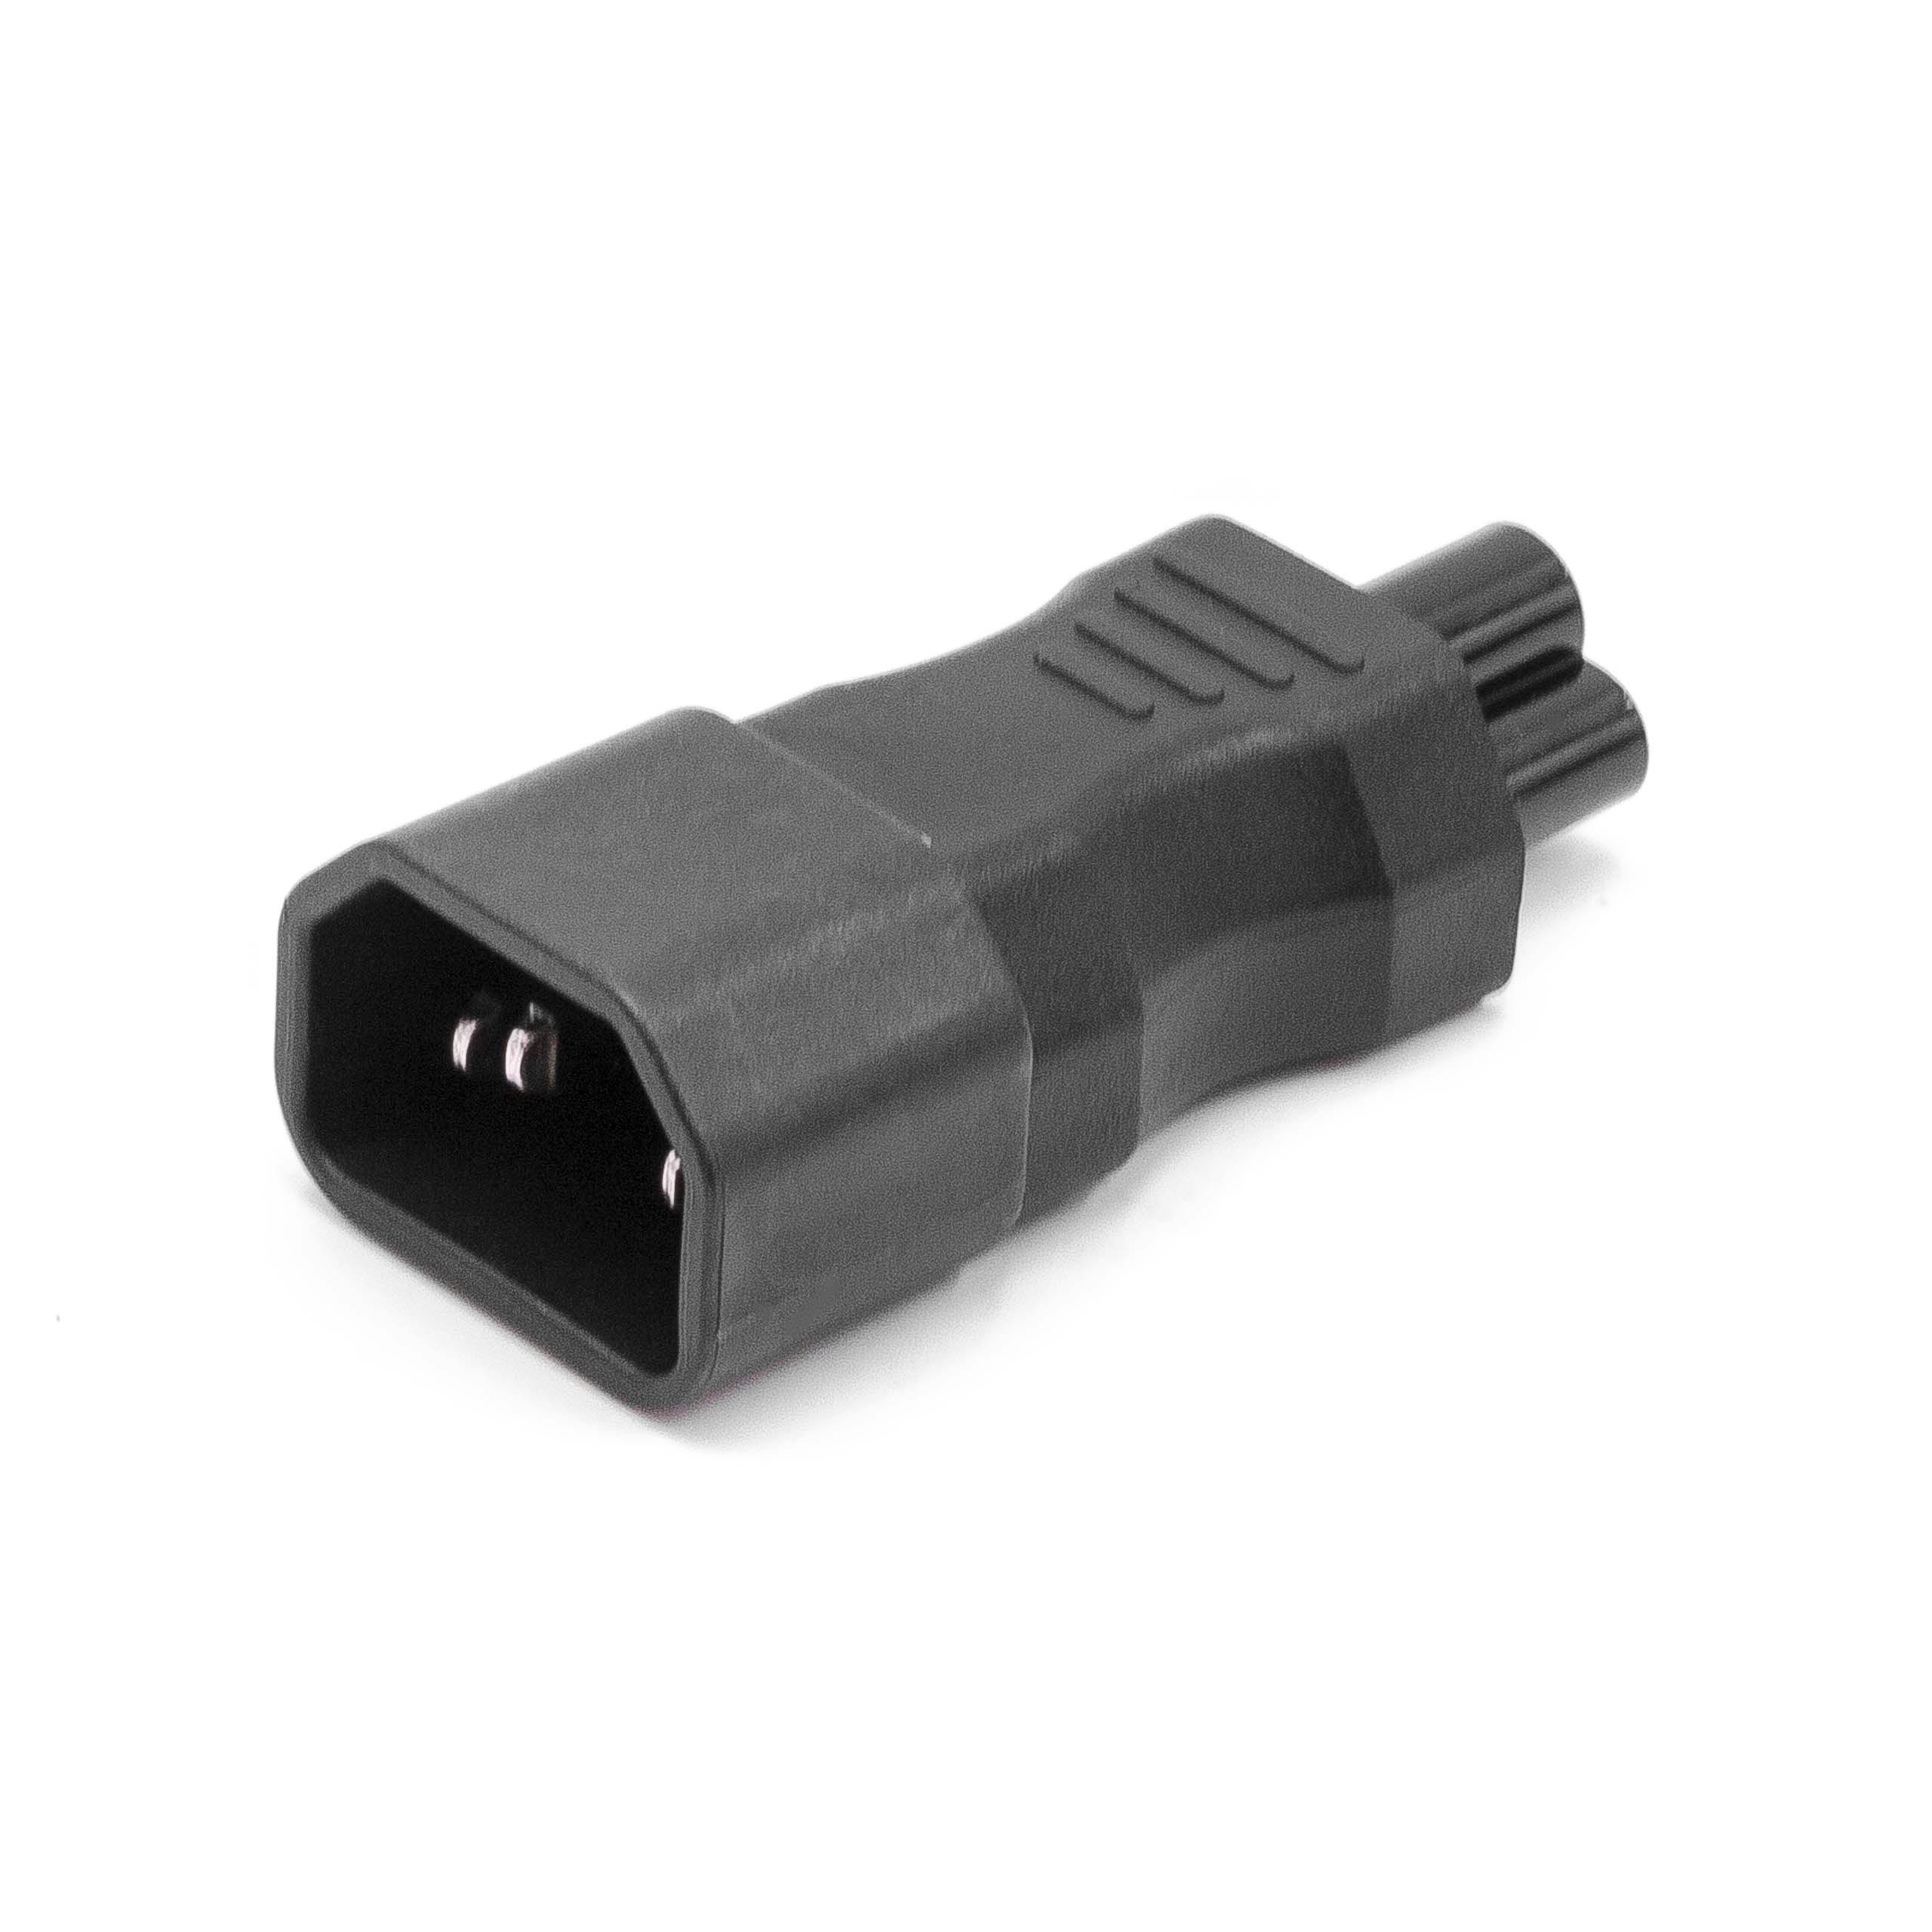 vhbw C14 (Male) to C5 (Female) Adapter for various Small Devices - IEC 320 Power Adapter Black